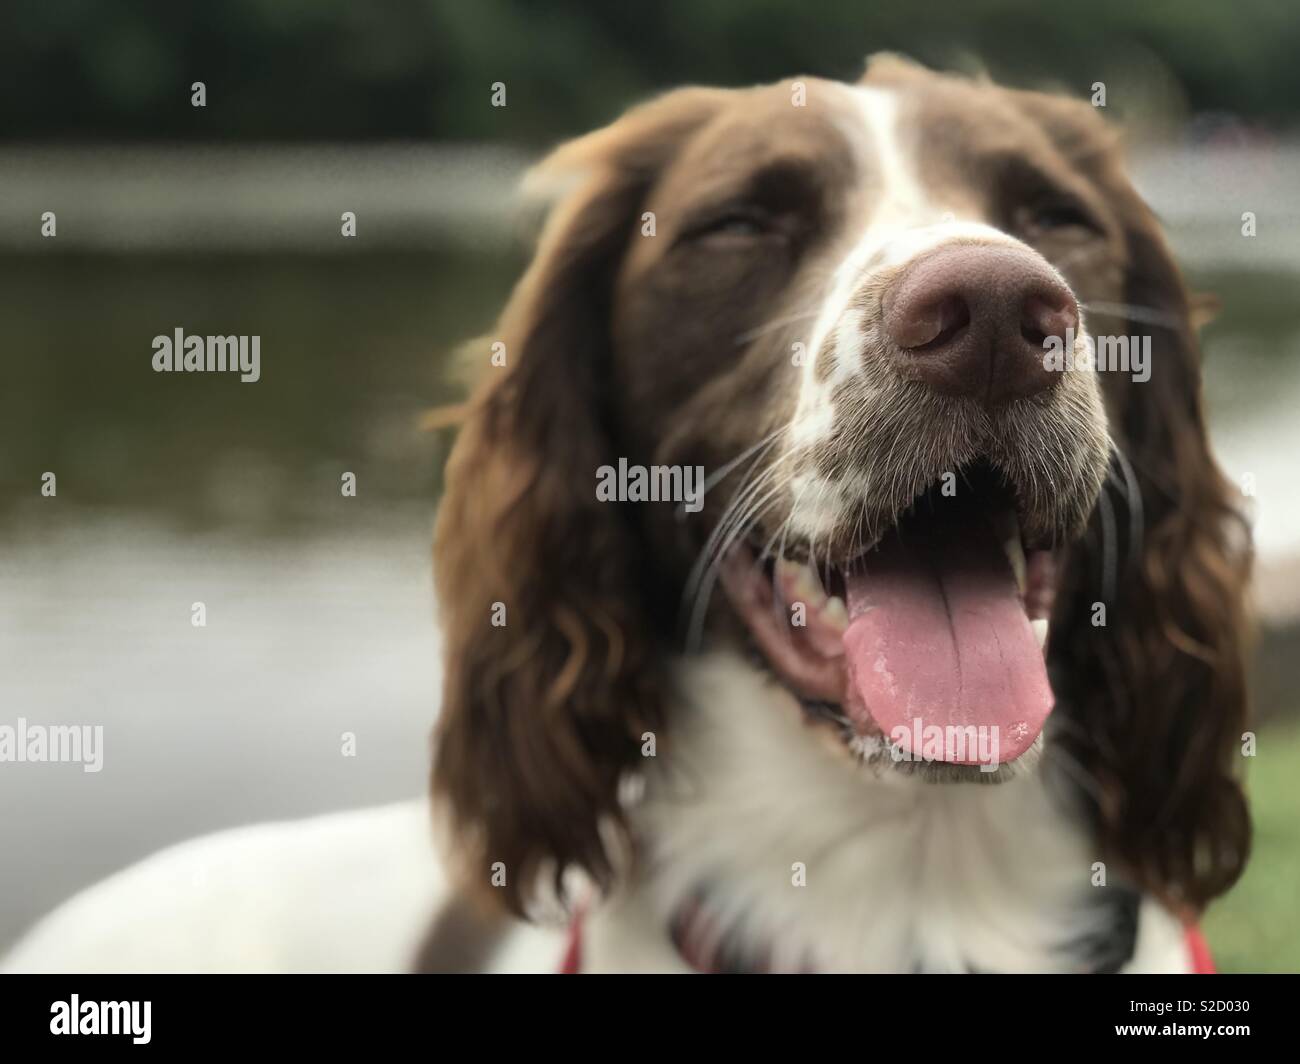 Doggy happiness ? Stock Photo